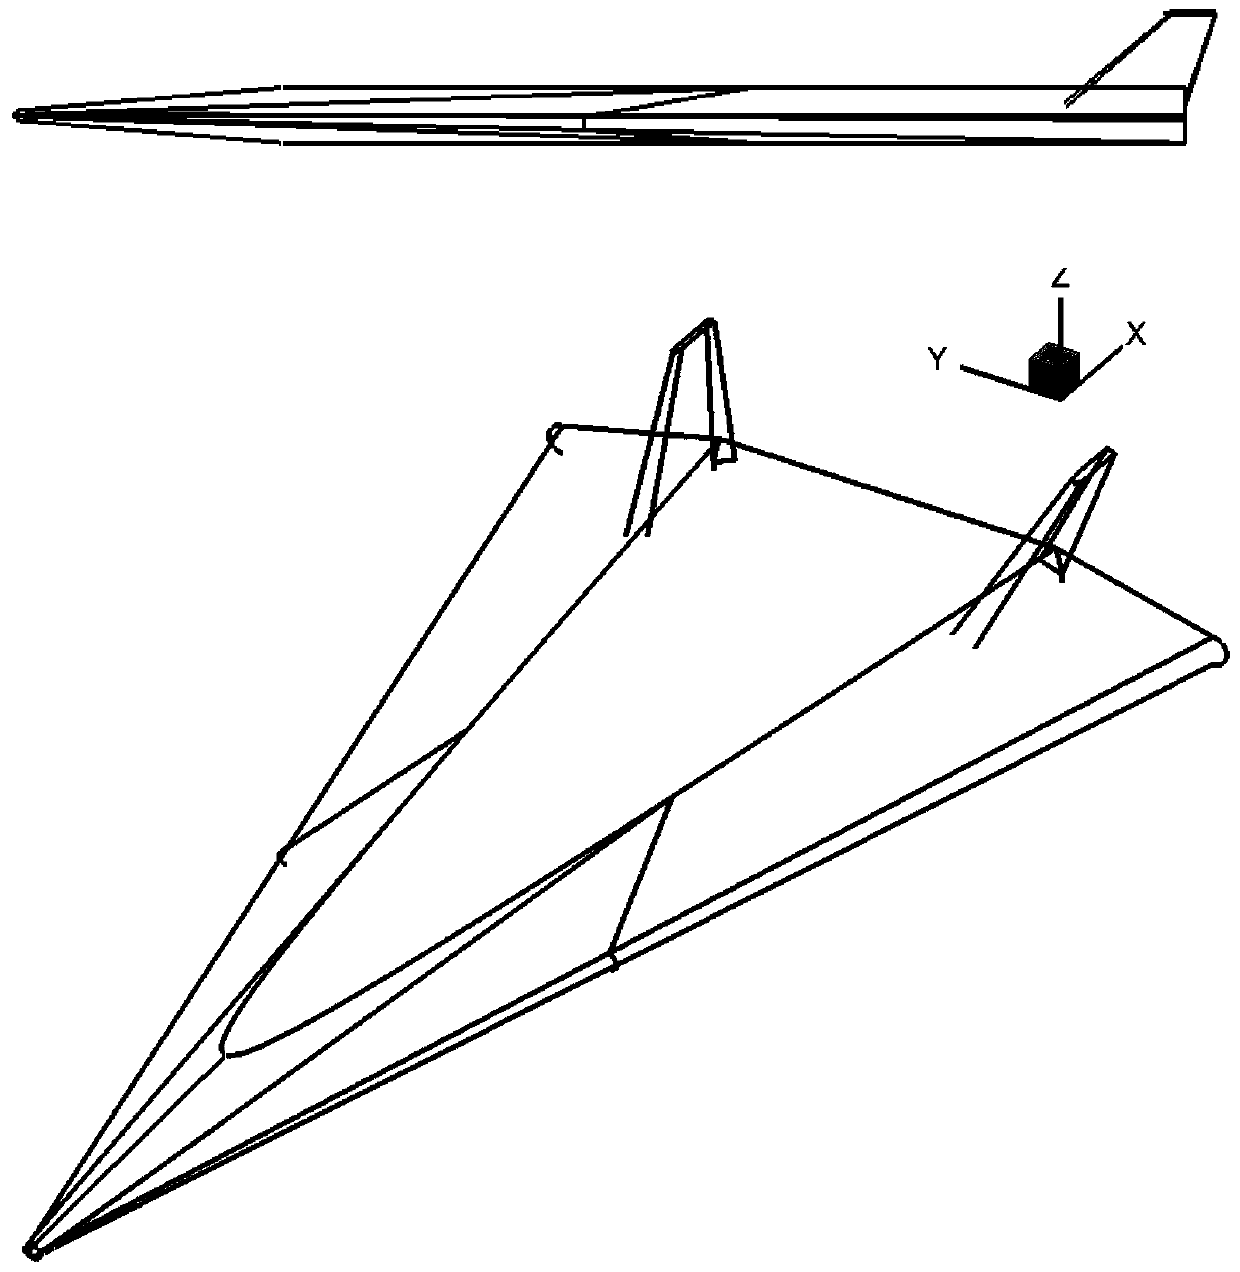 Simplified model design method suitable for mechanism research of complex hypersonic aircraft